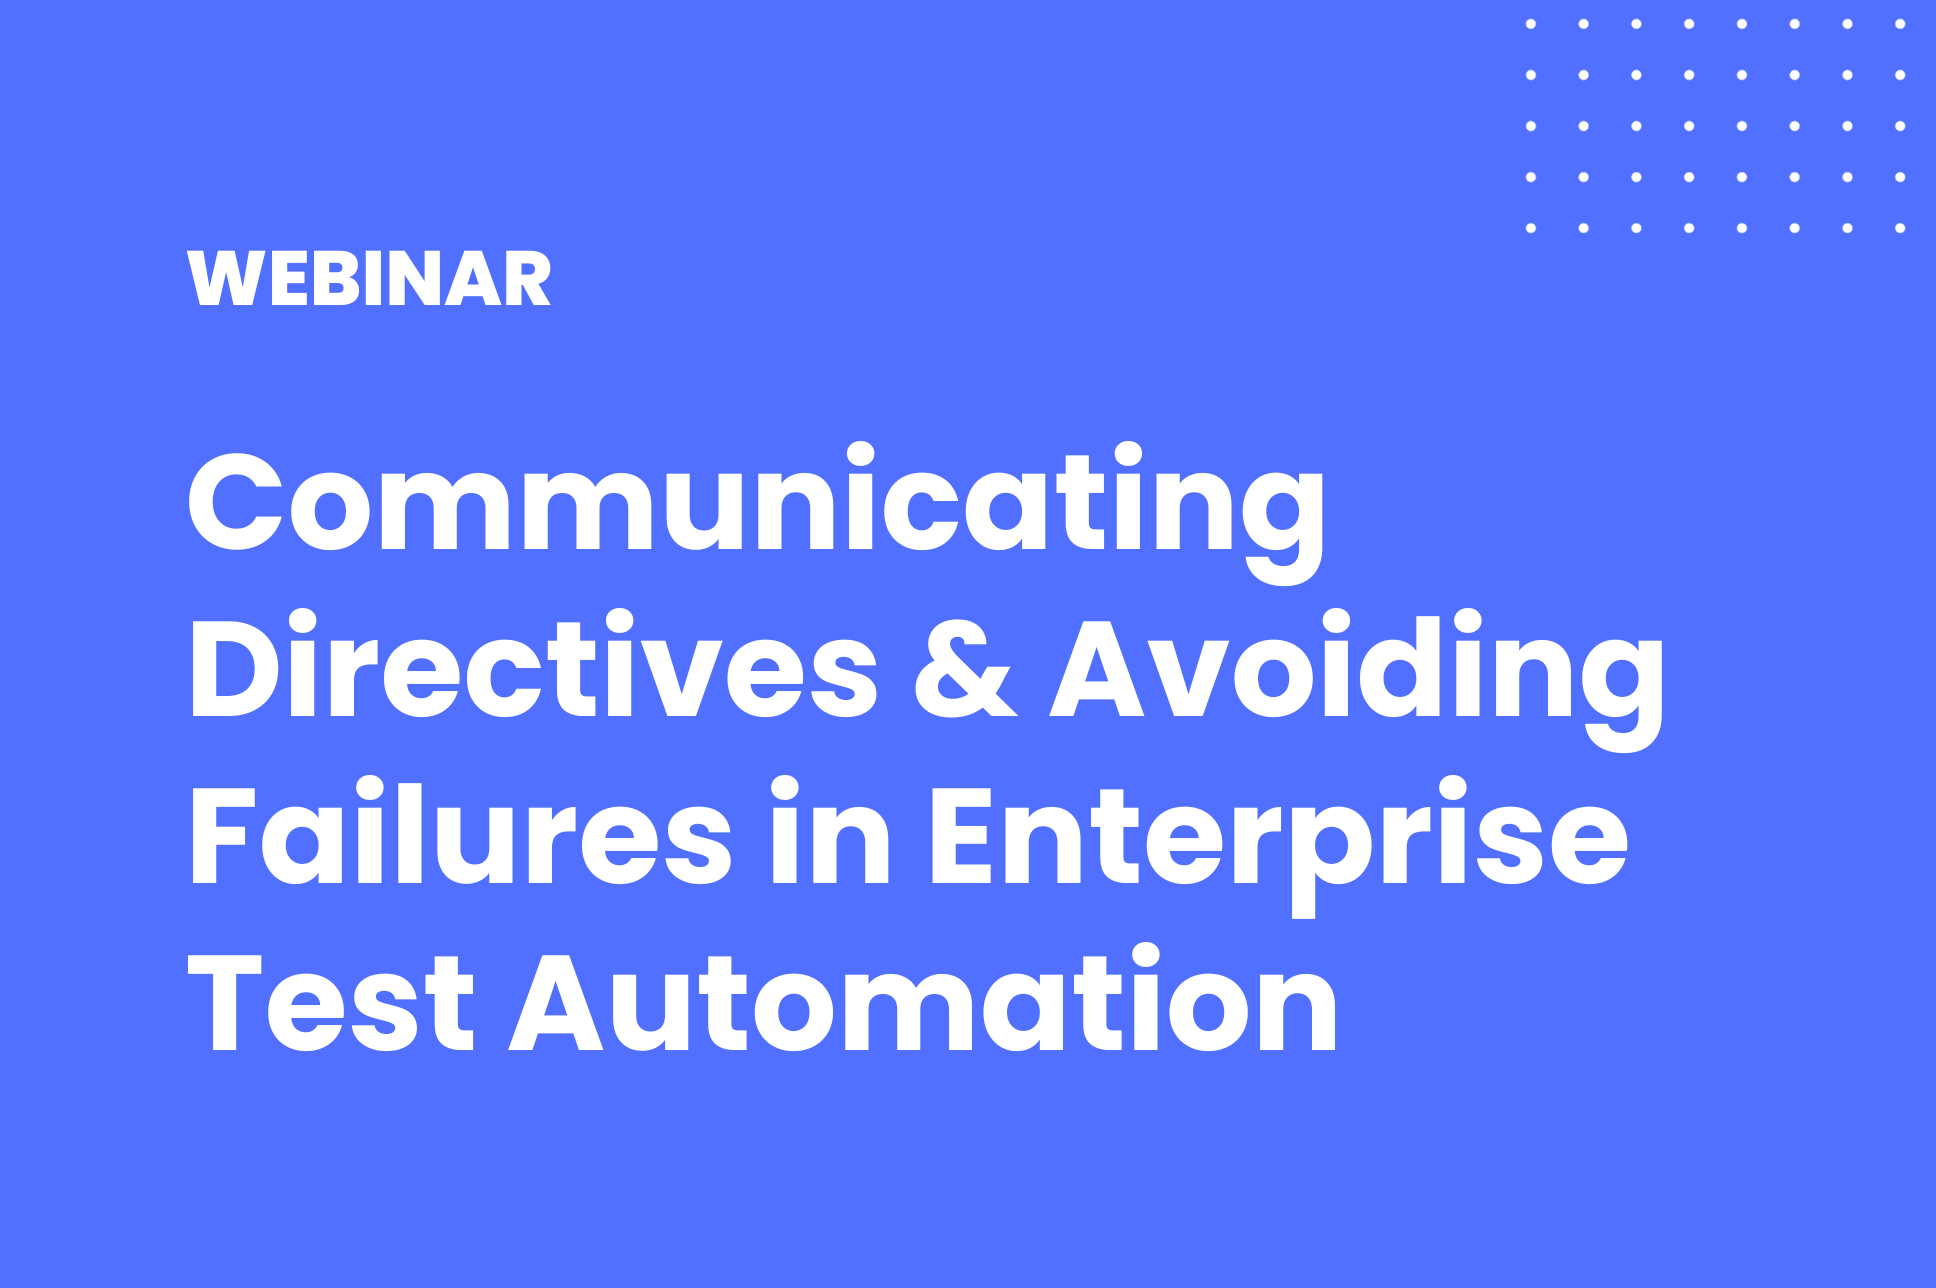 Webinar Comminicating directives and avoiding failures in enterprise test automation